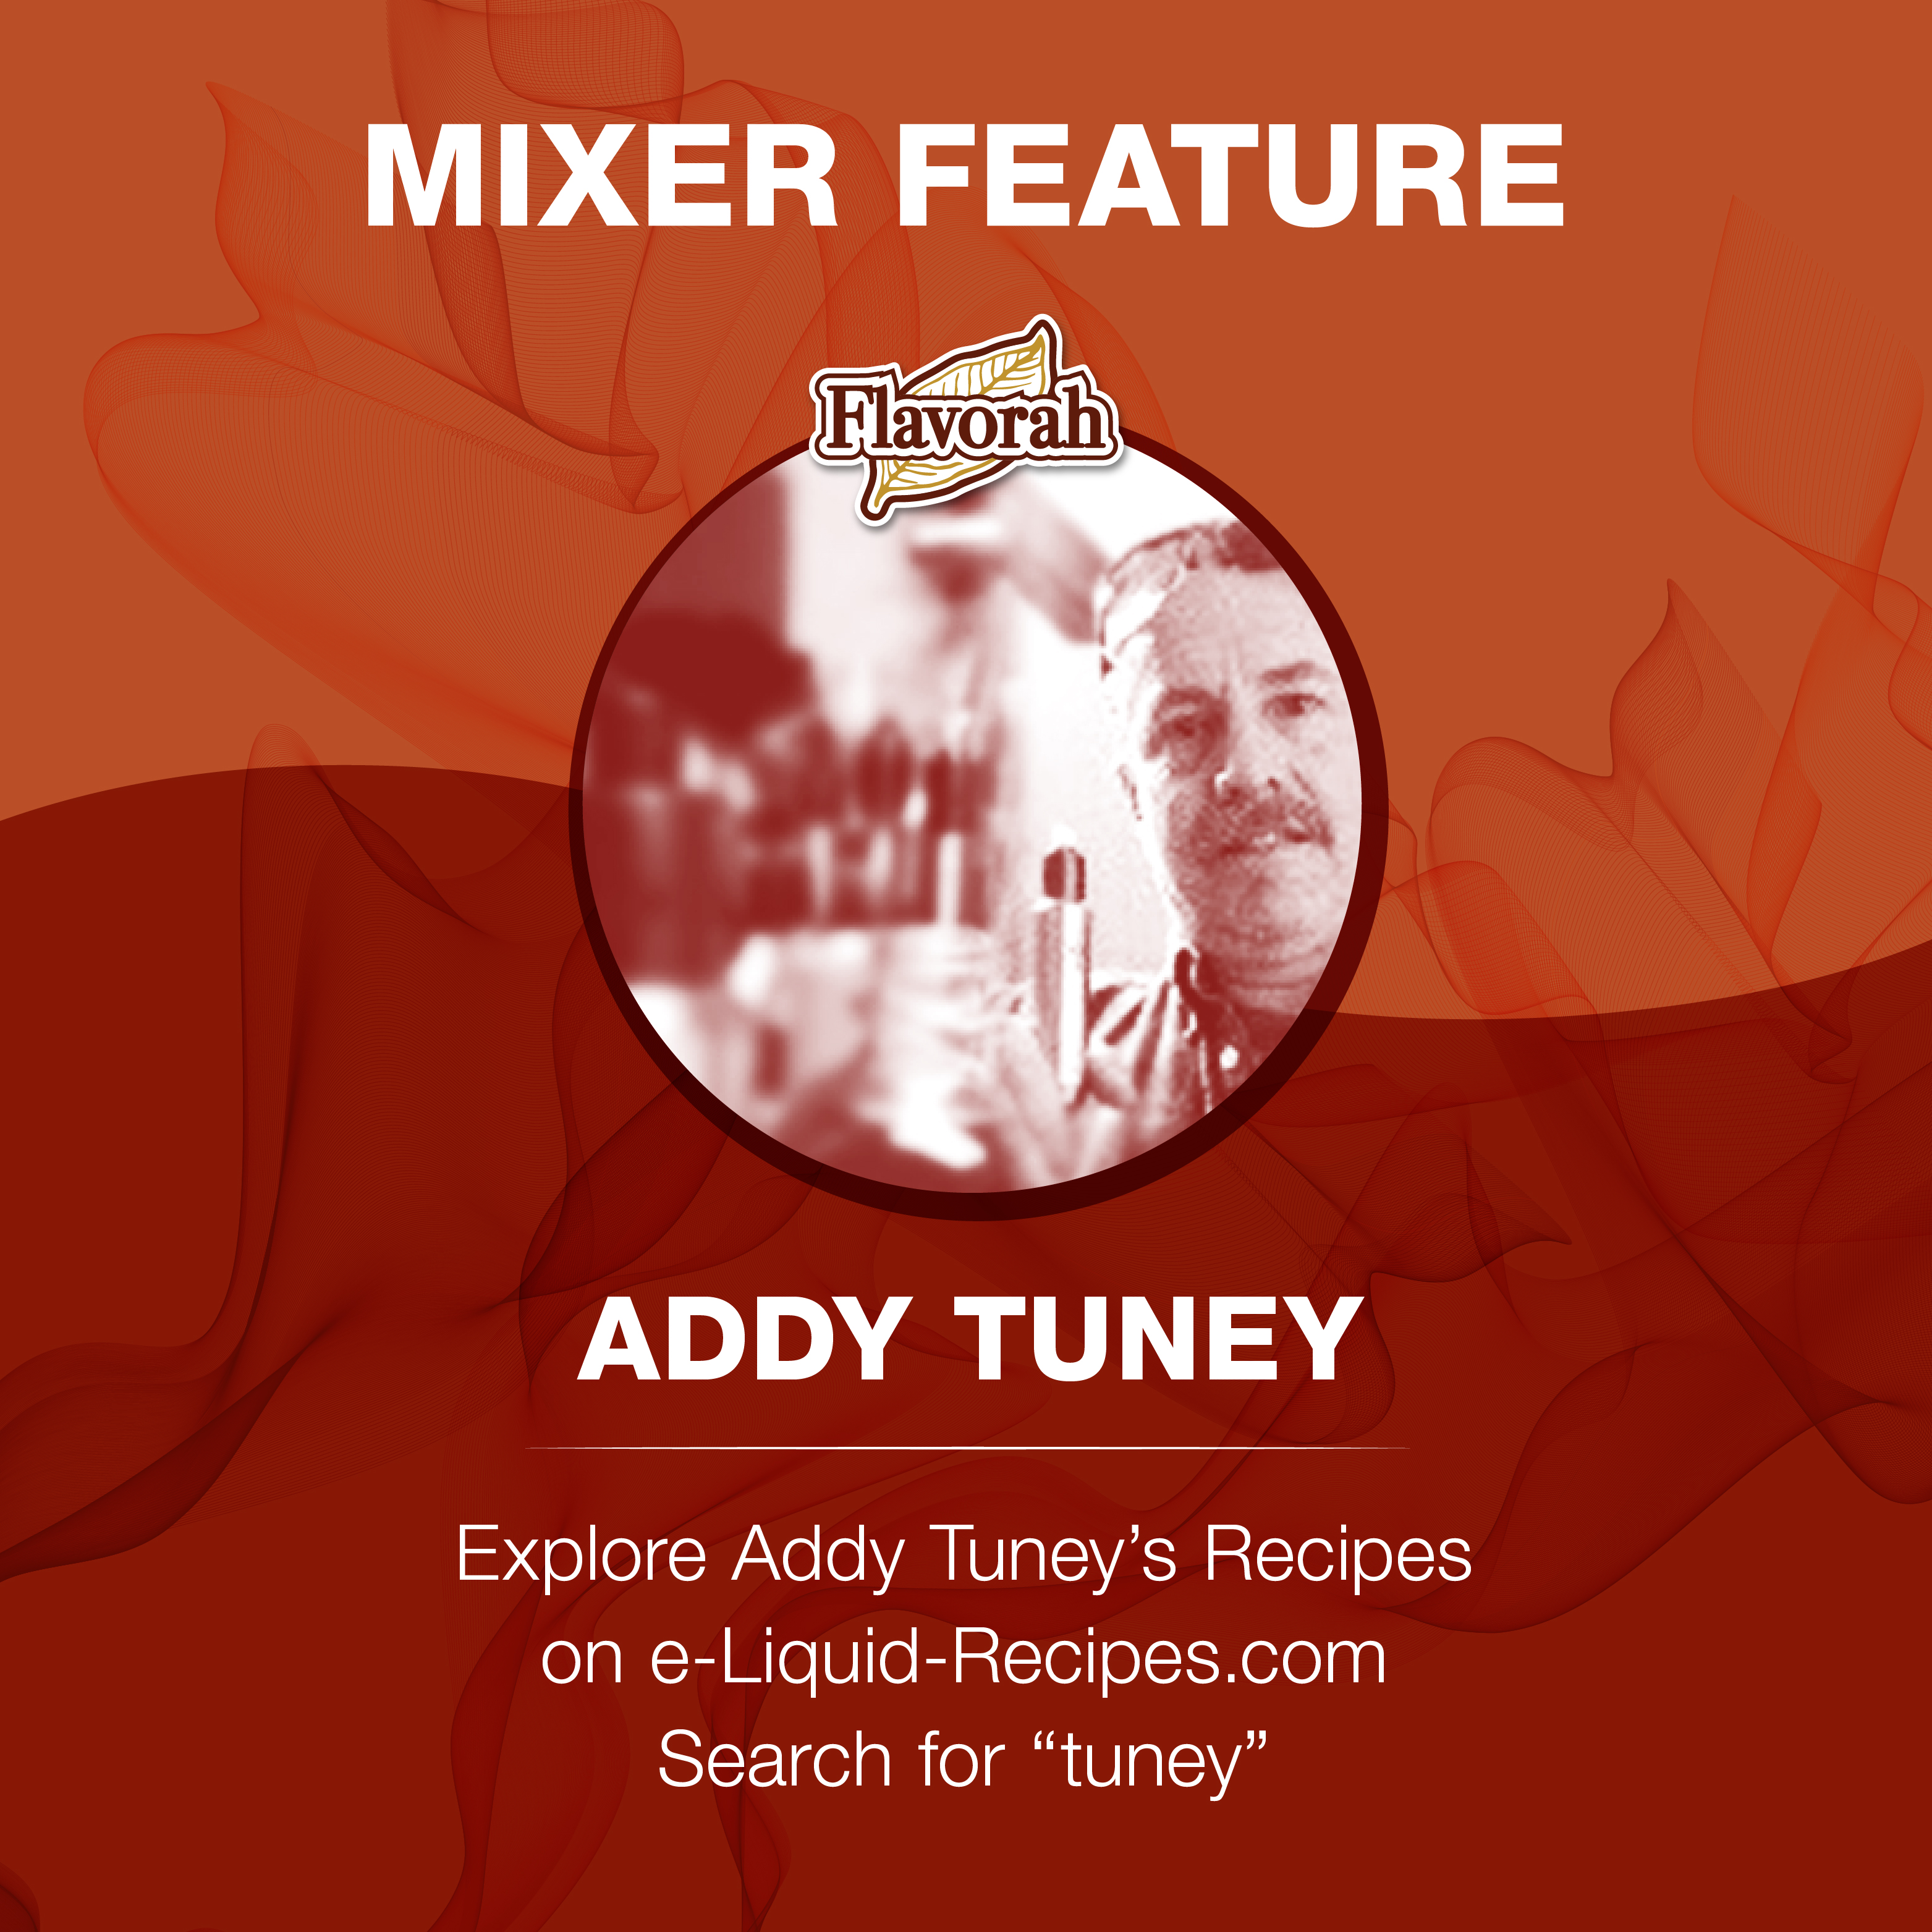 Featured Mixer: Addy Tuney